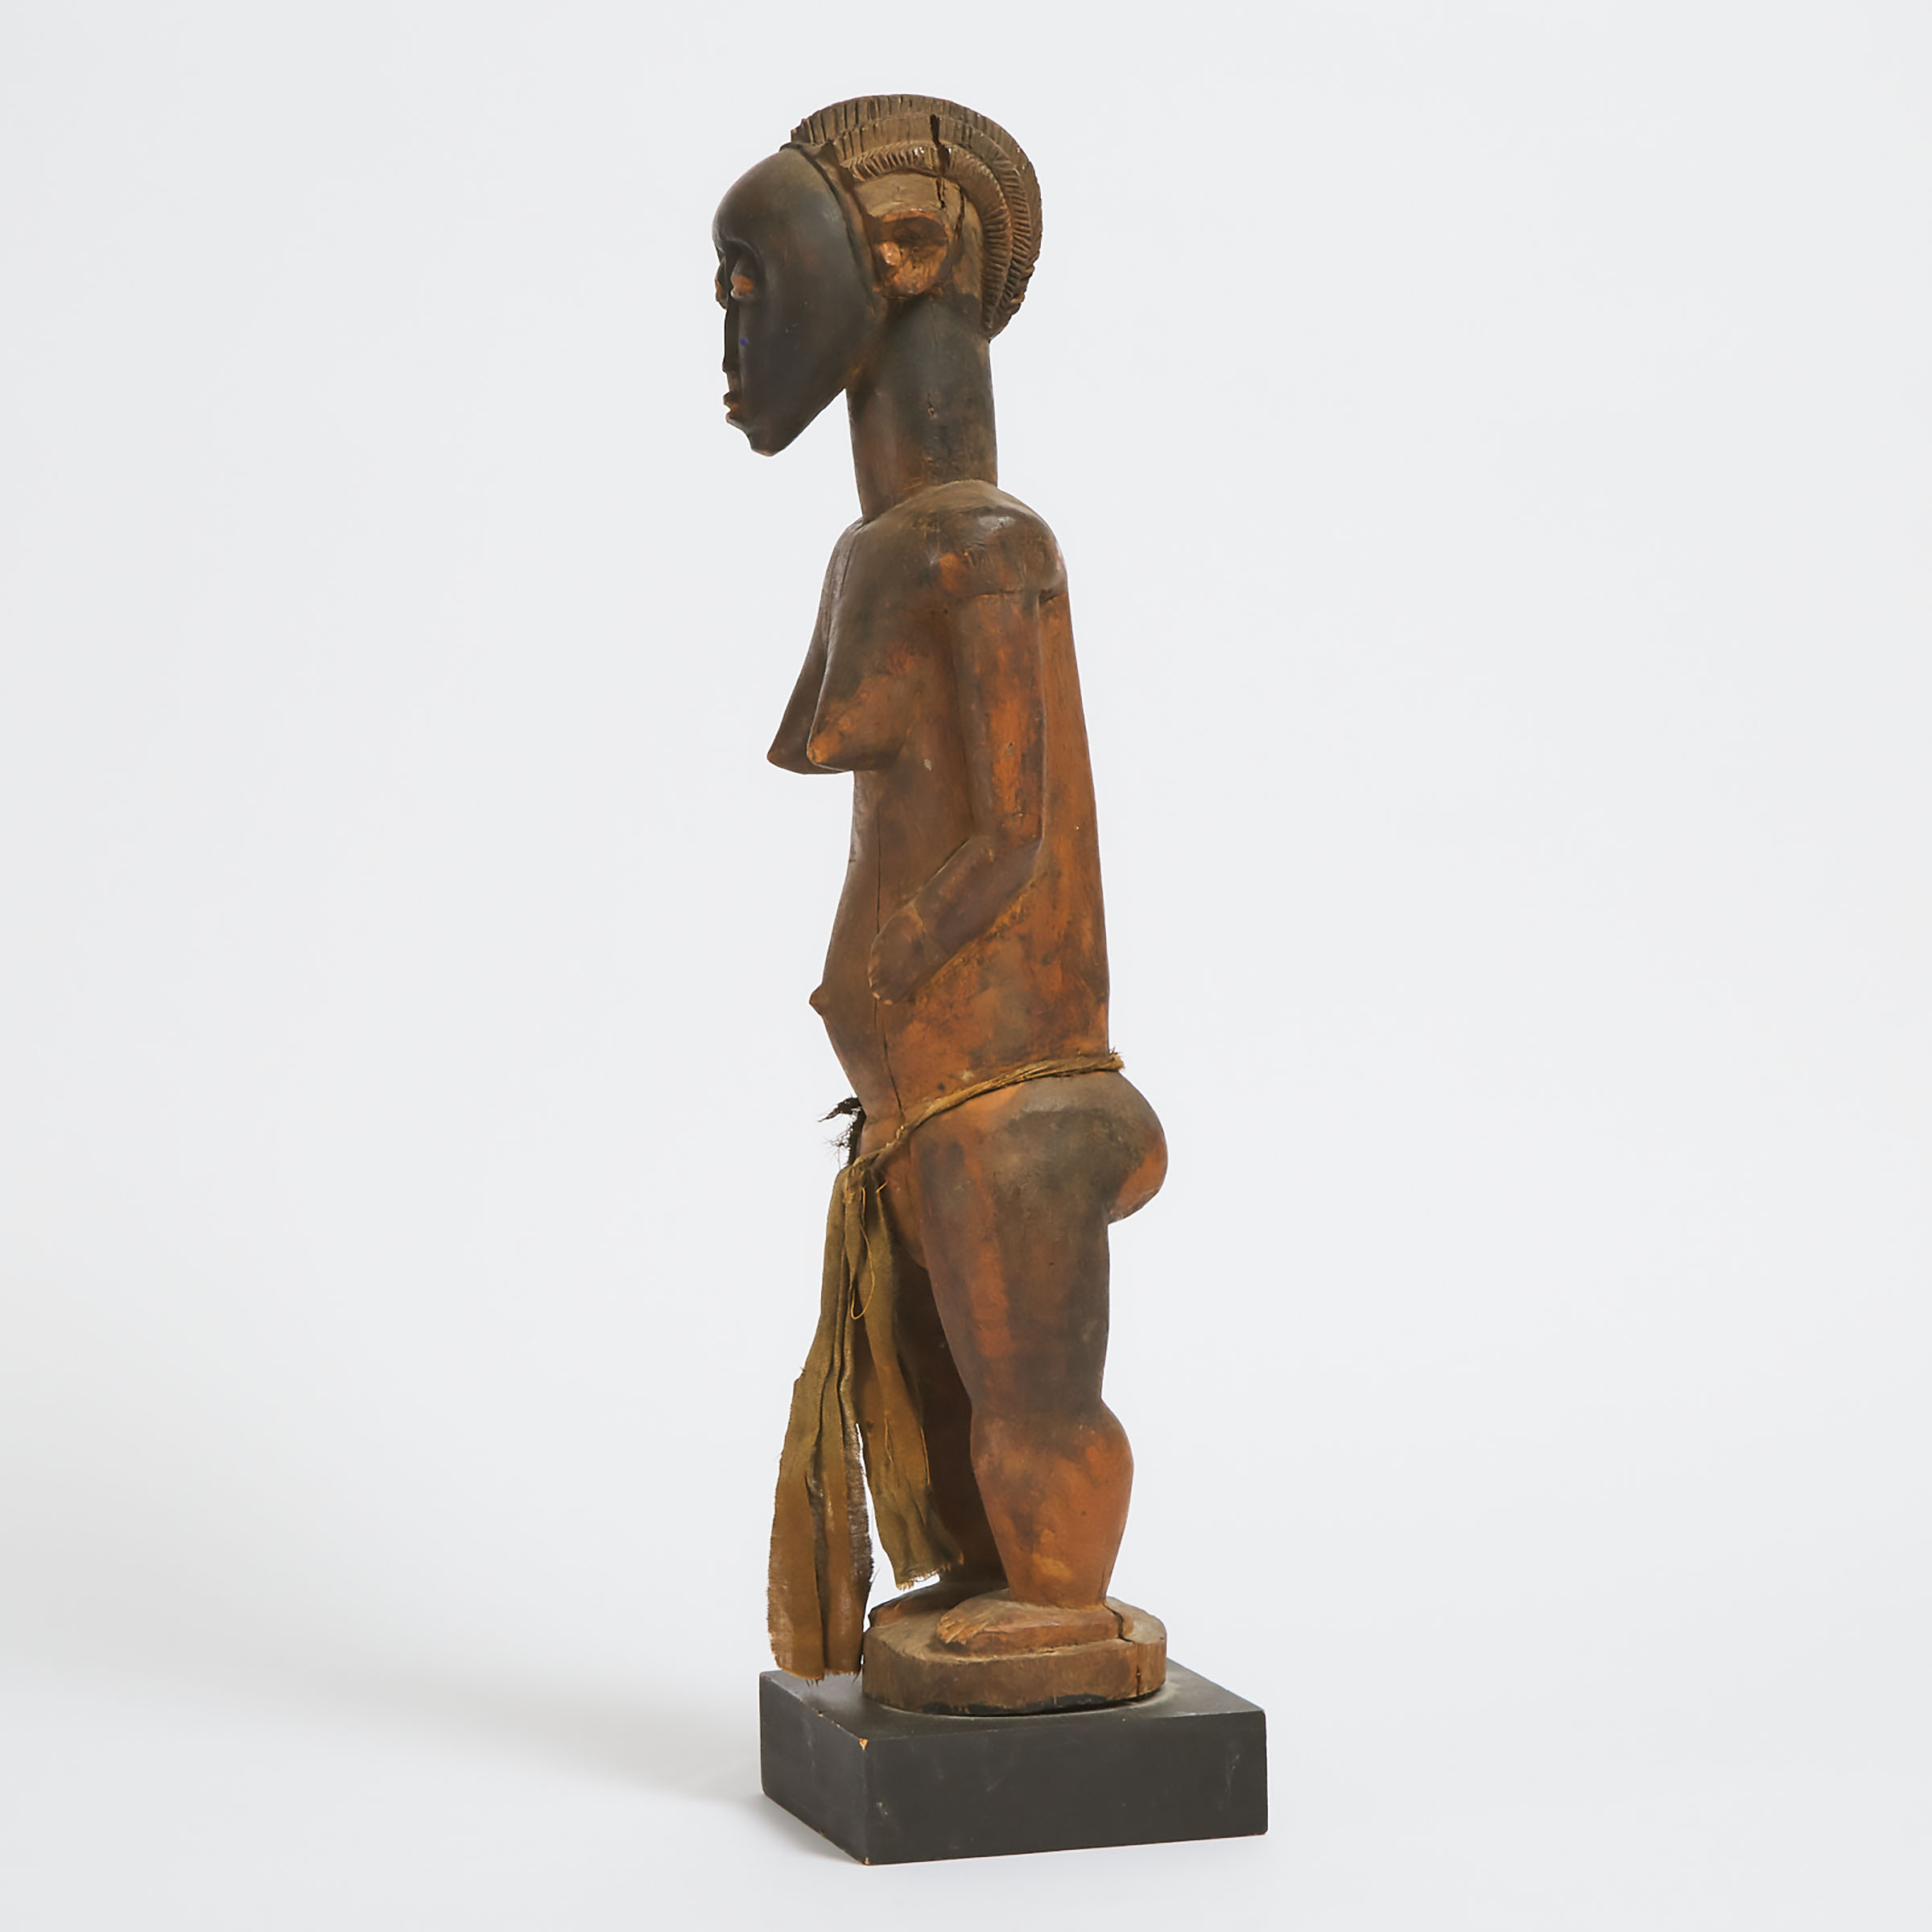 Baule Standing Female Figure, Ivory Coast, West Africa, early 20th century